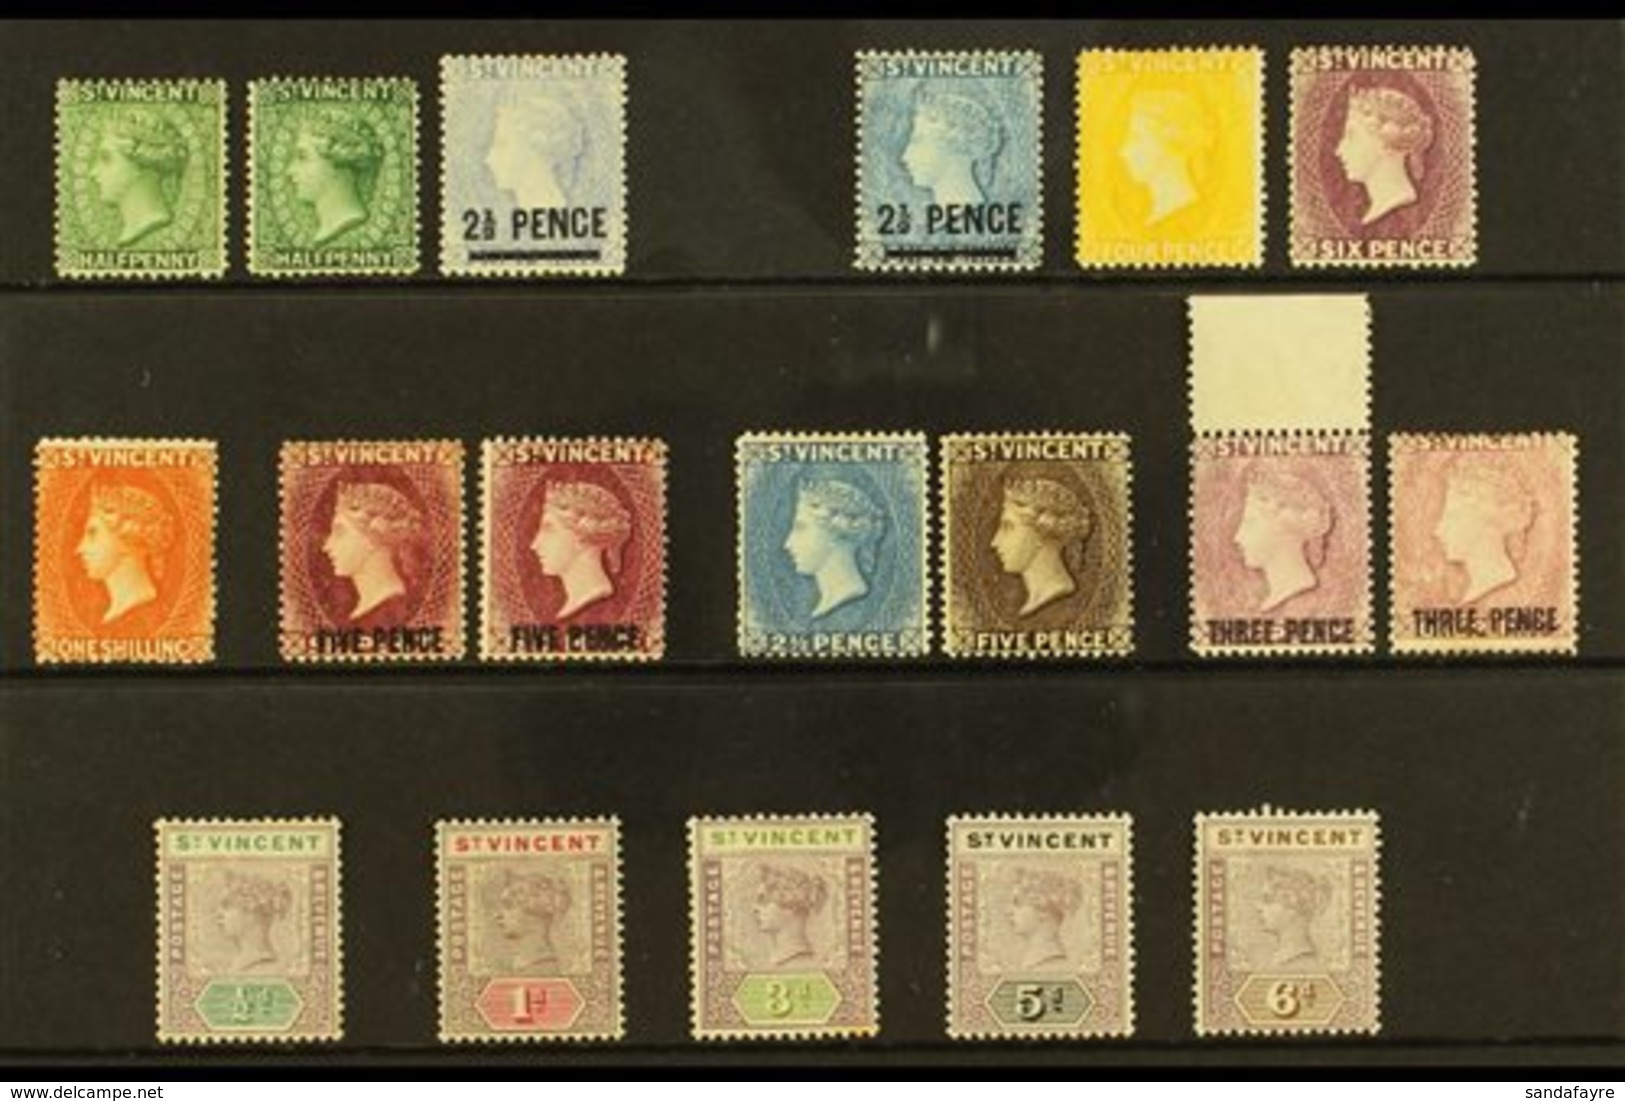 1885-1899 MINT SELECTION.  An Attractive Mint Selection With Values To 1s & Includes Some Shade Variants, Presented Chro - St.Vincent (...-1979)